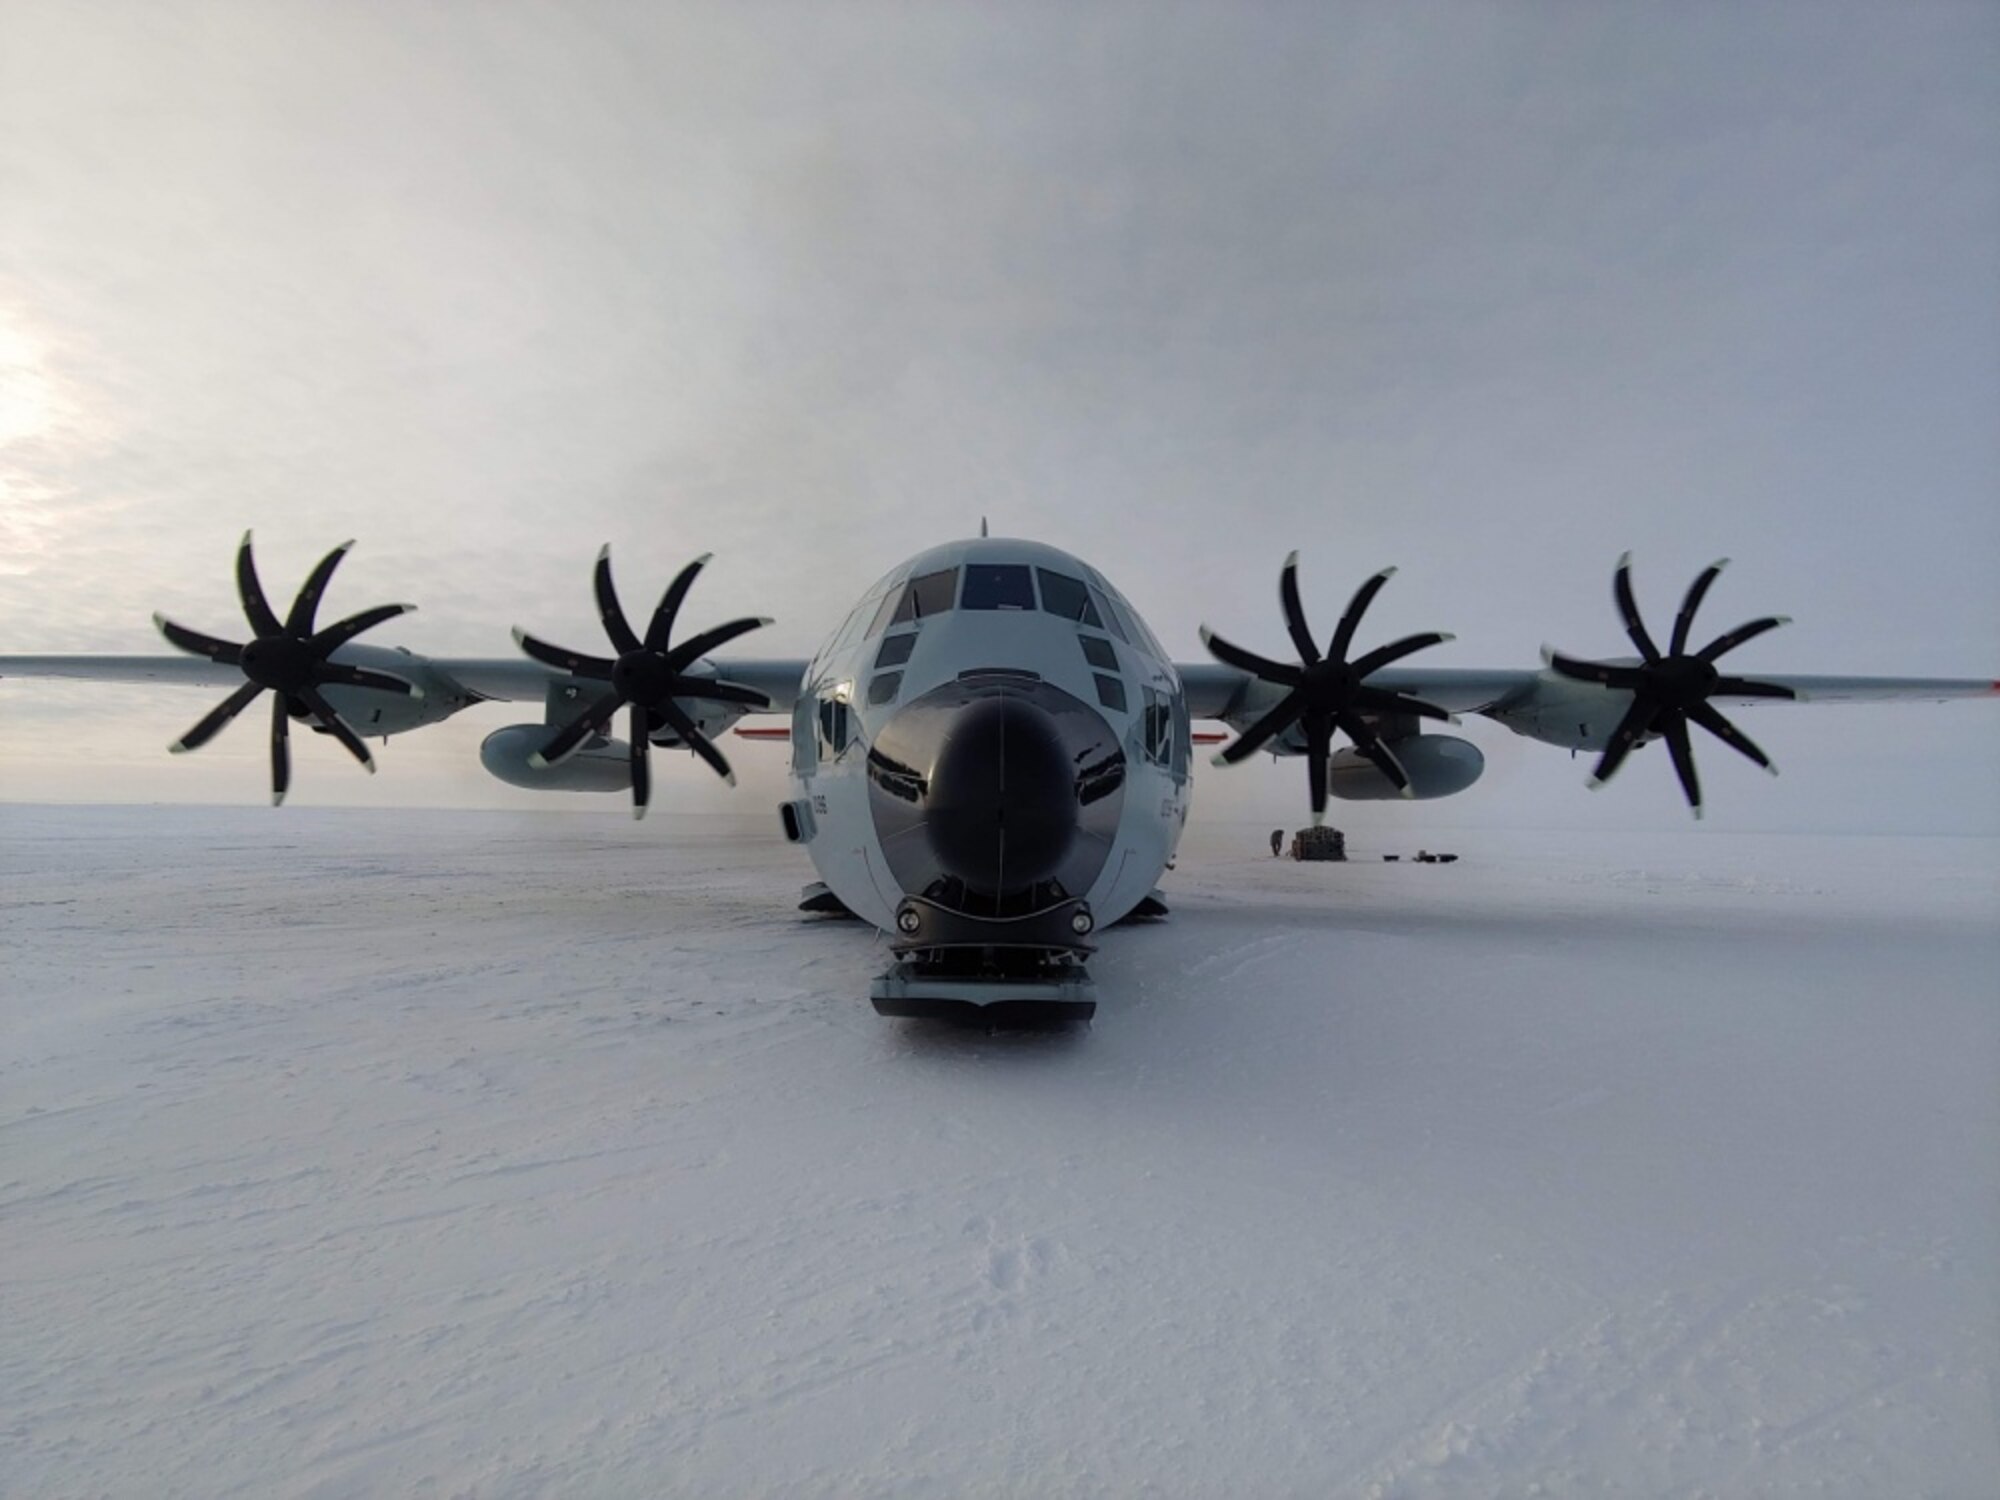 An LC-130 "Skibird" assigned to the New York Air National Guard's 109th Airlift Wing parks during Exercise Arctic Eagle 2020 March 8, 2020. The 109th Airlift Wing flies the largest ski-equipped aircraft in the world and supports Antarctic research